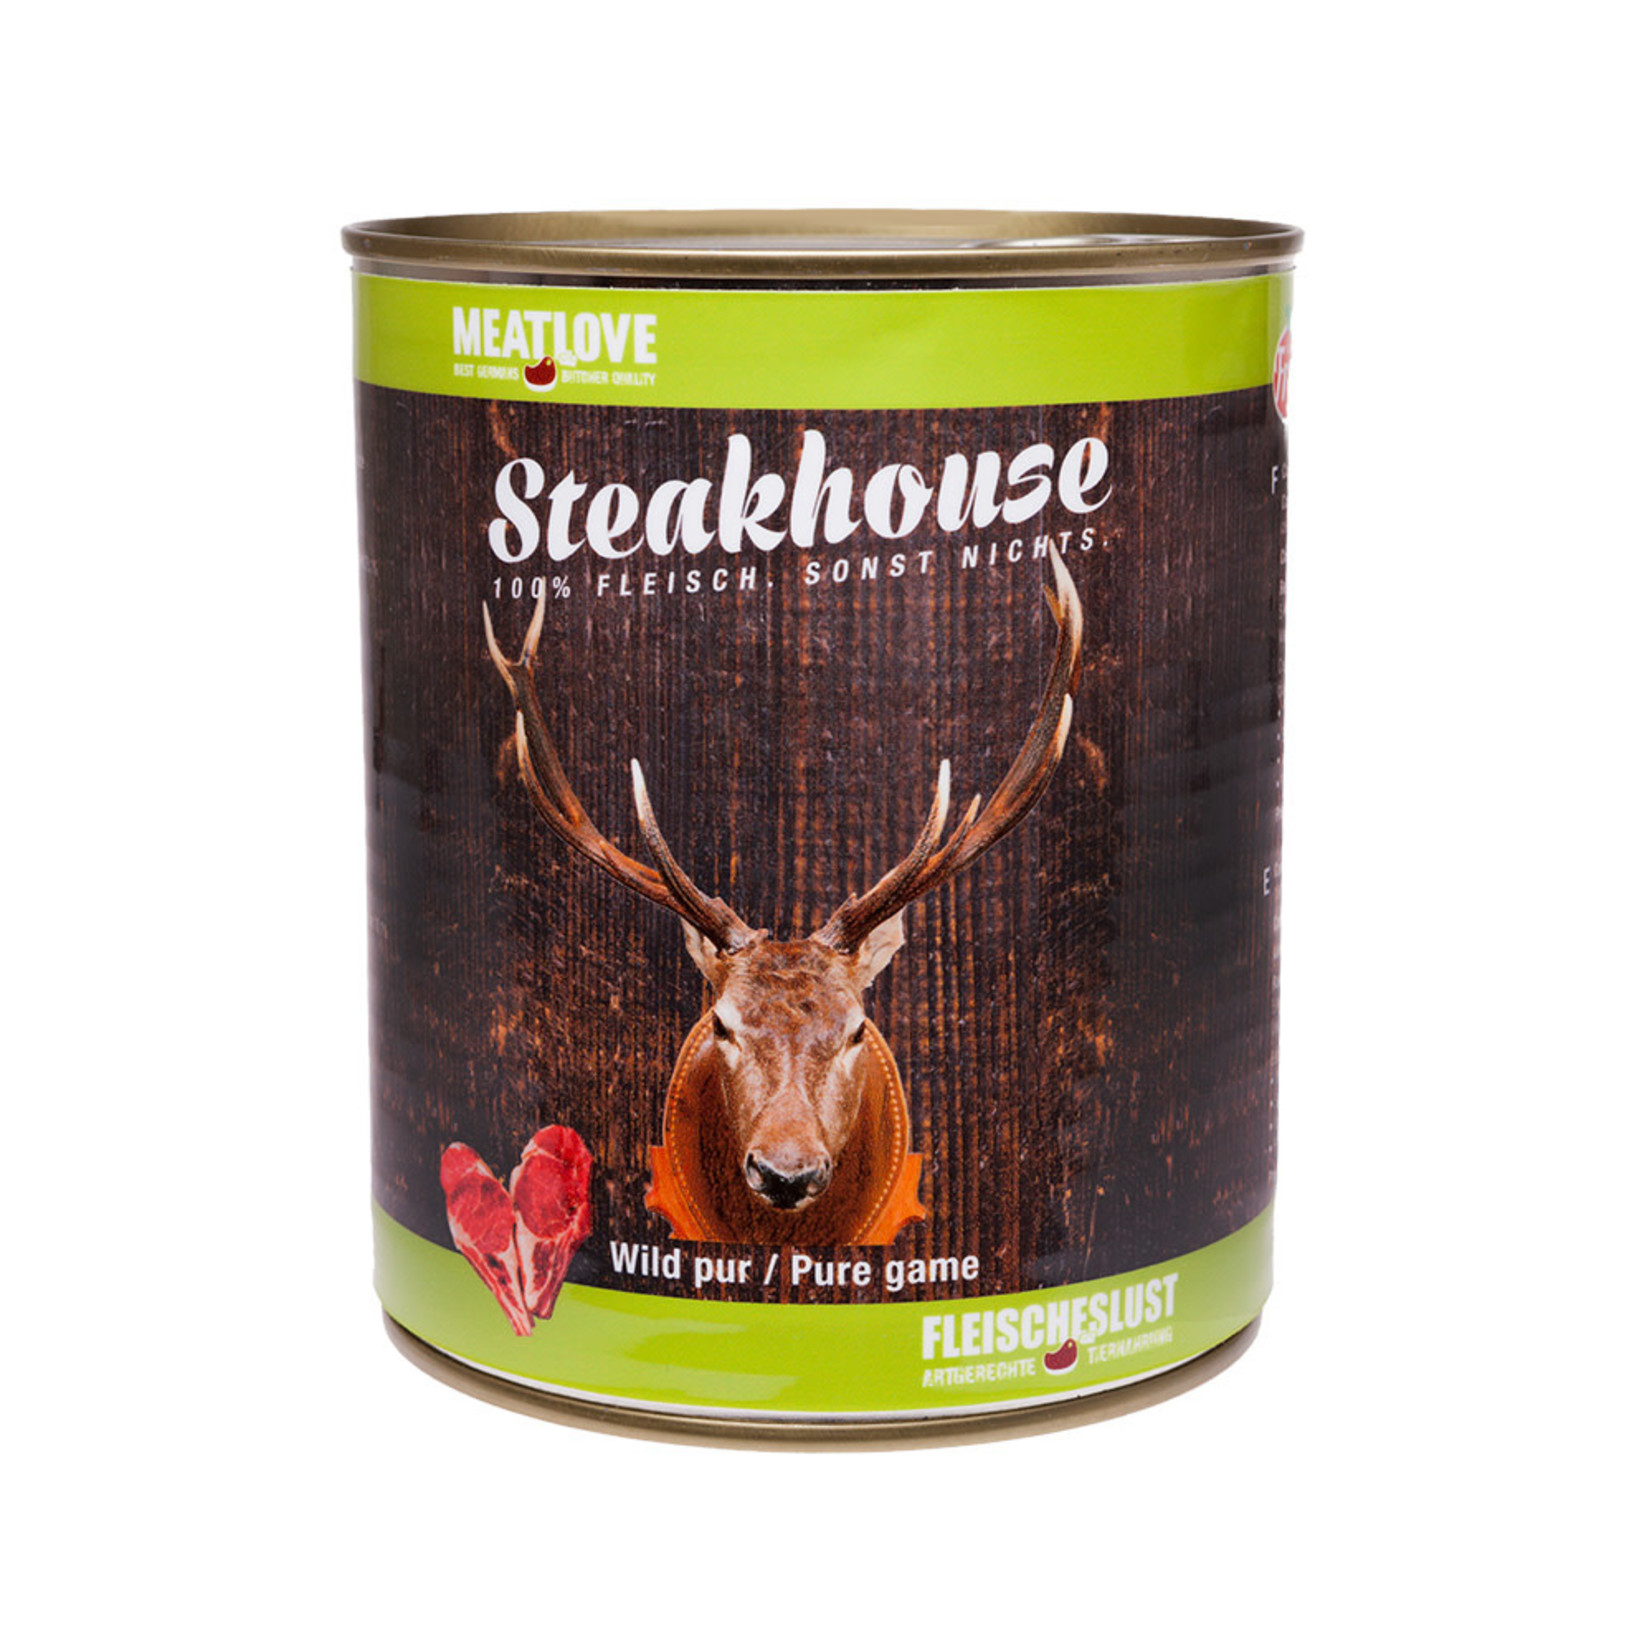 Steakhouse Meatlove Steakhouse Tinned Pure Game